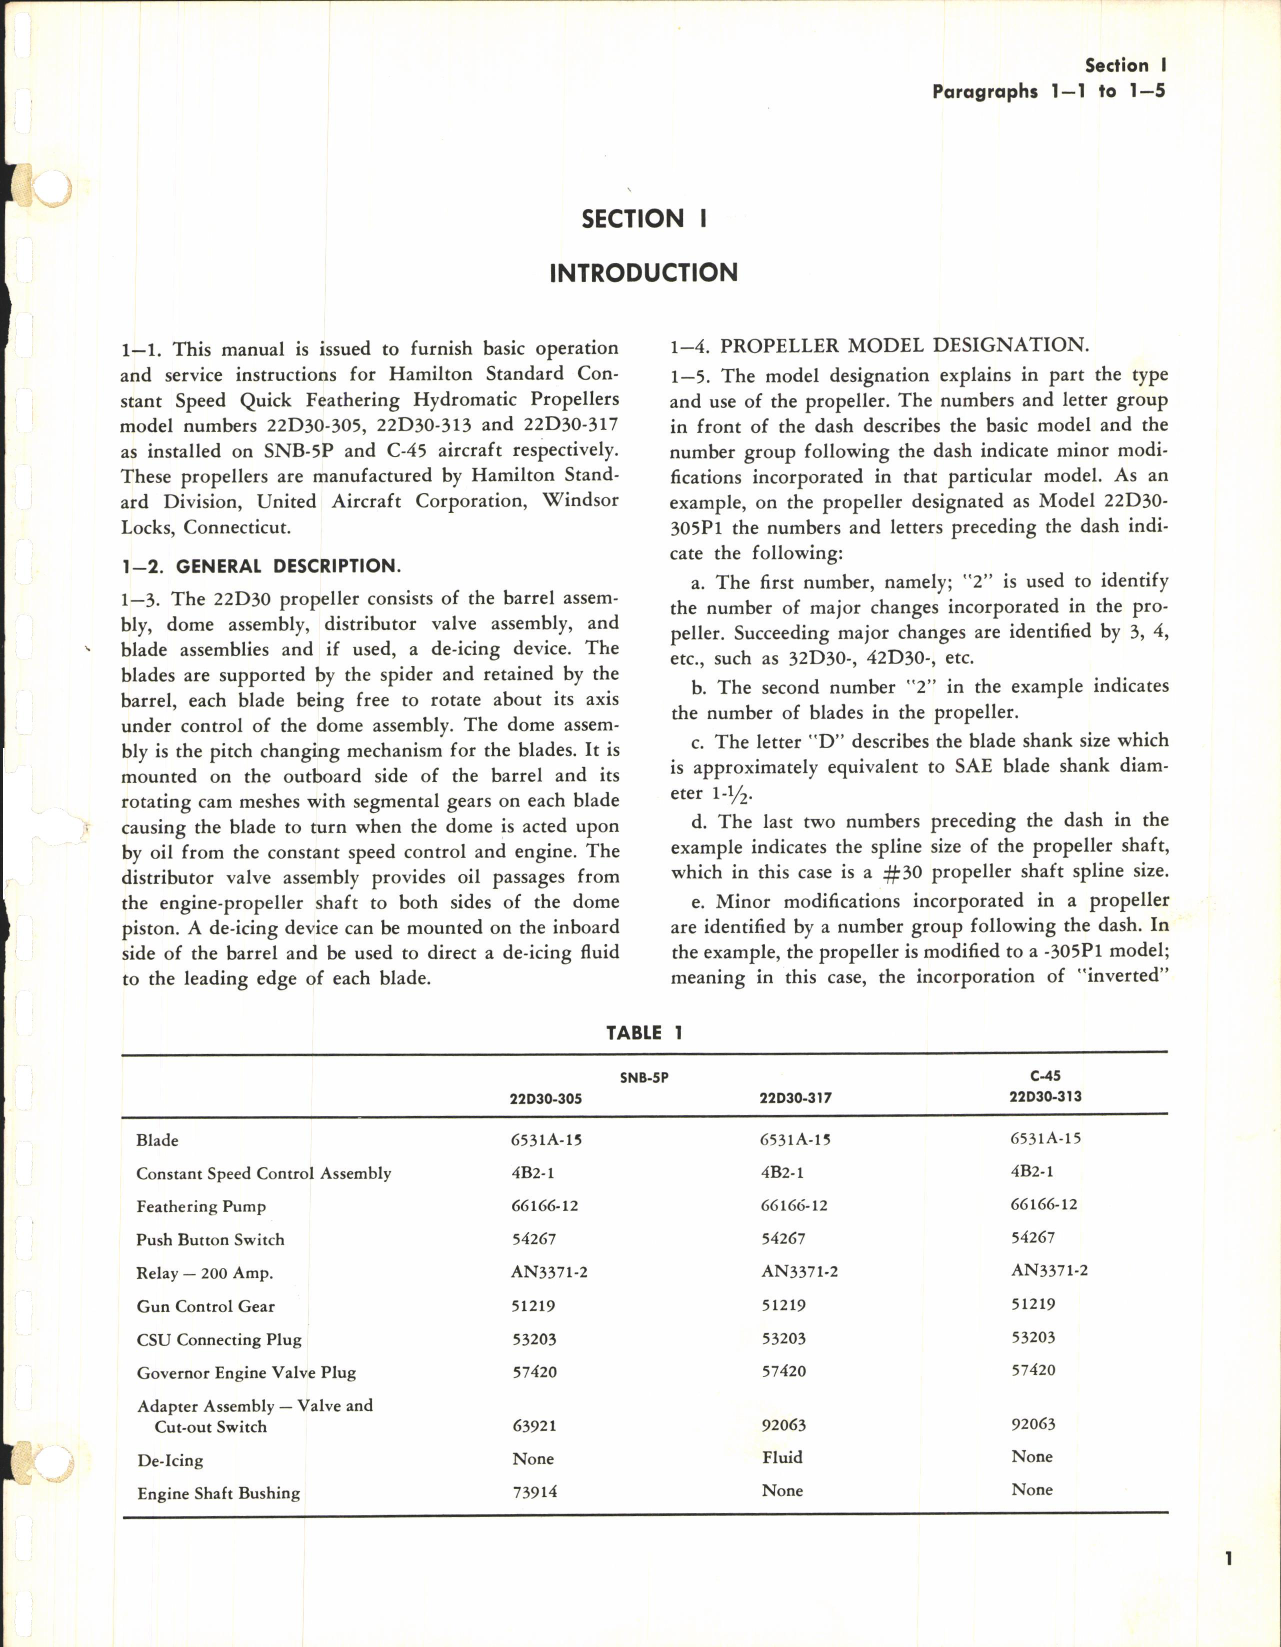 Sample page 7 from AirCorps Library document: Maintenance Manual for 22D30 and 22D40 Hydromatic Propellers